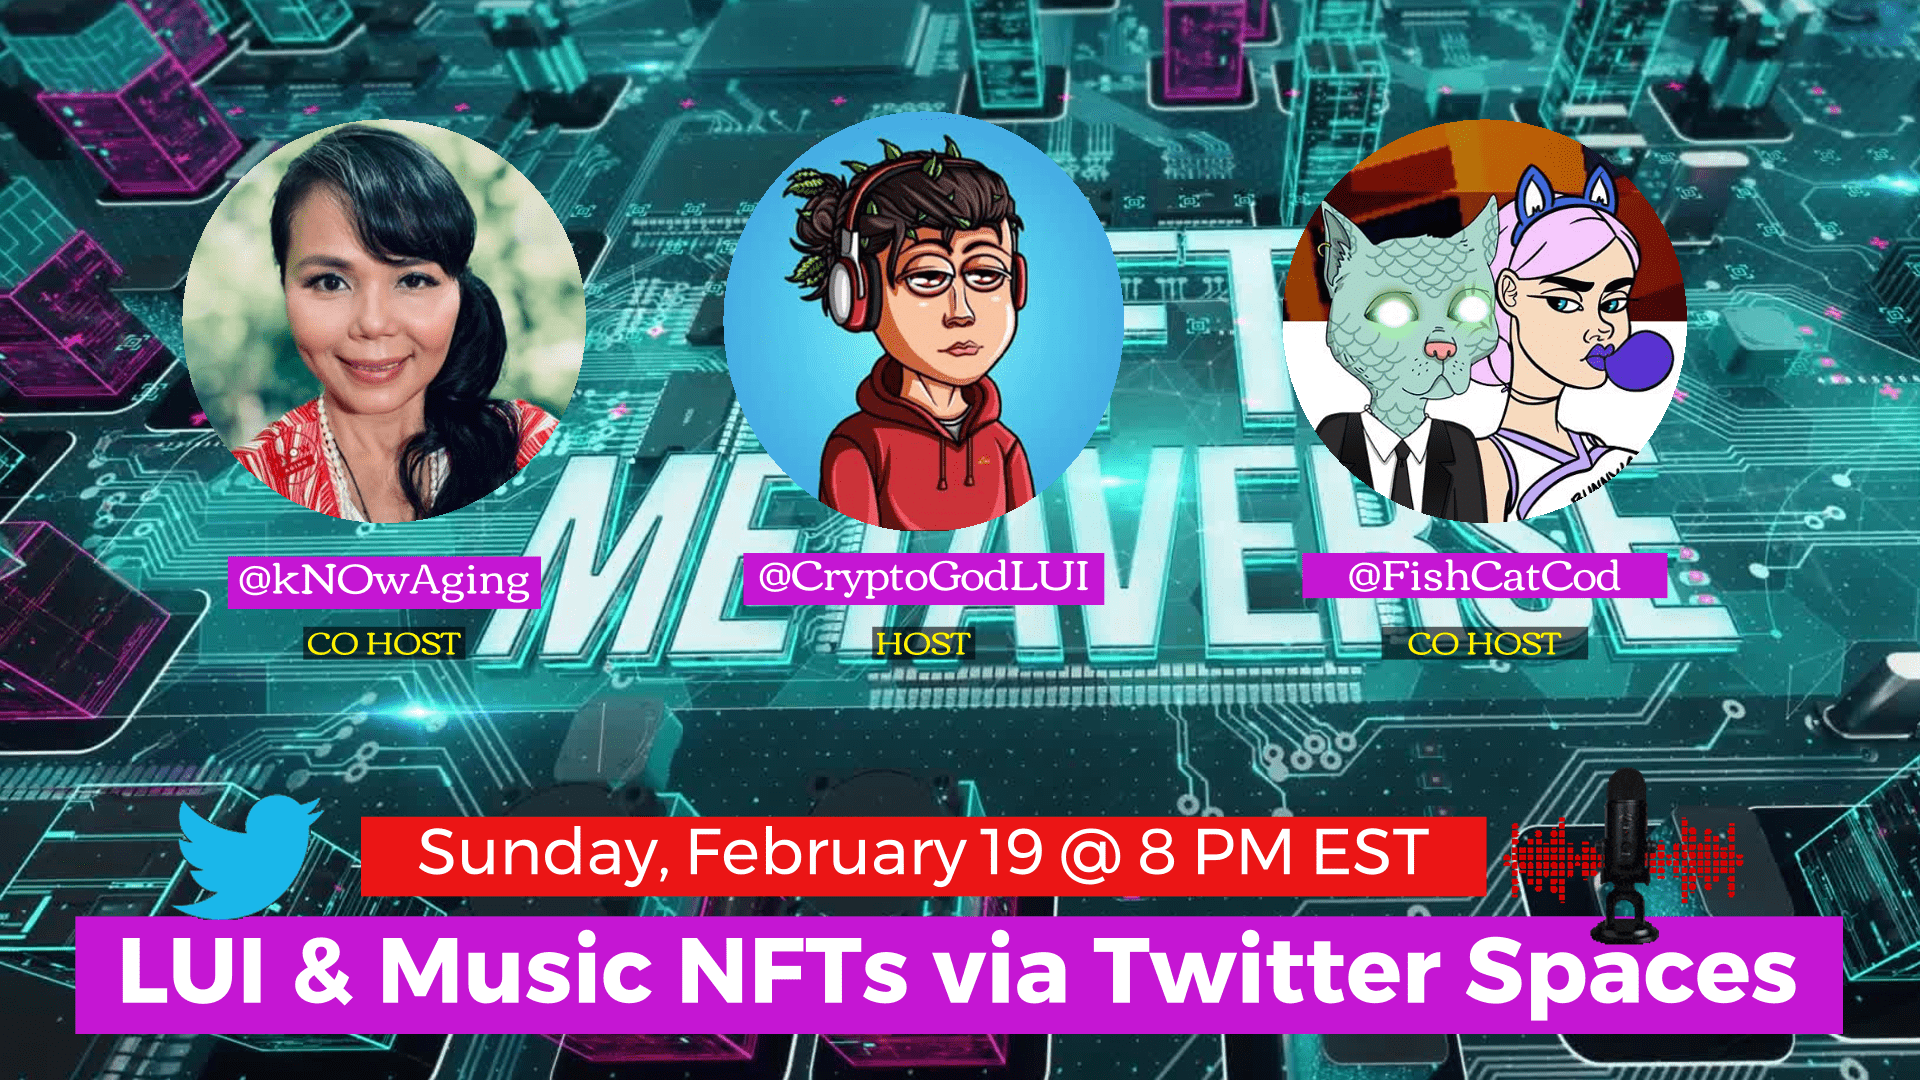 Join Host, @Cryptogodlui, and Co-Hosts @knowaging & @FishCatCod for LUI & Music NFTs via Twitter Spaces. Sunday, Feb. 19 at 8 PM EST. WEB3 #OpenMIC #Networking